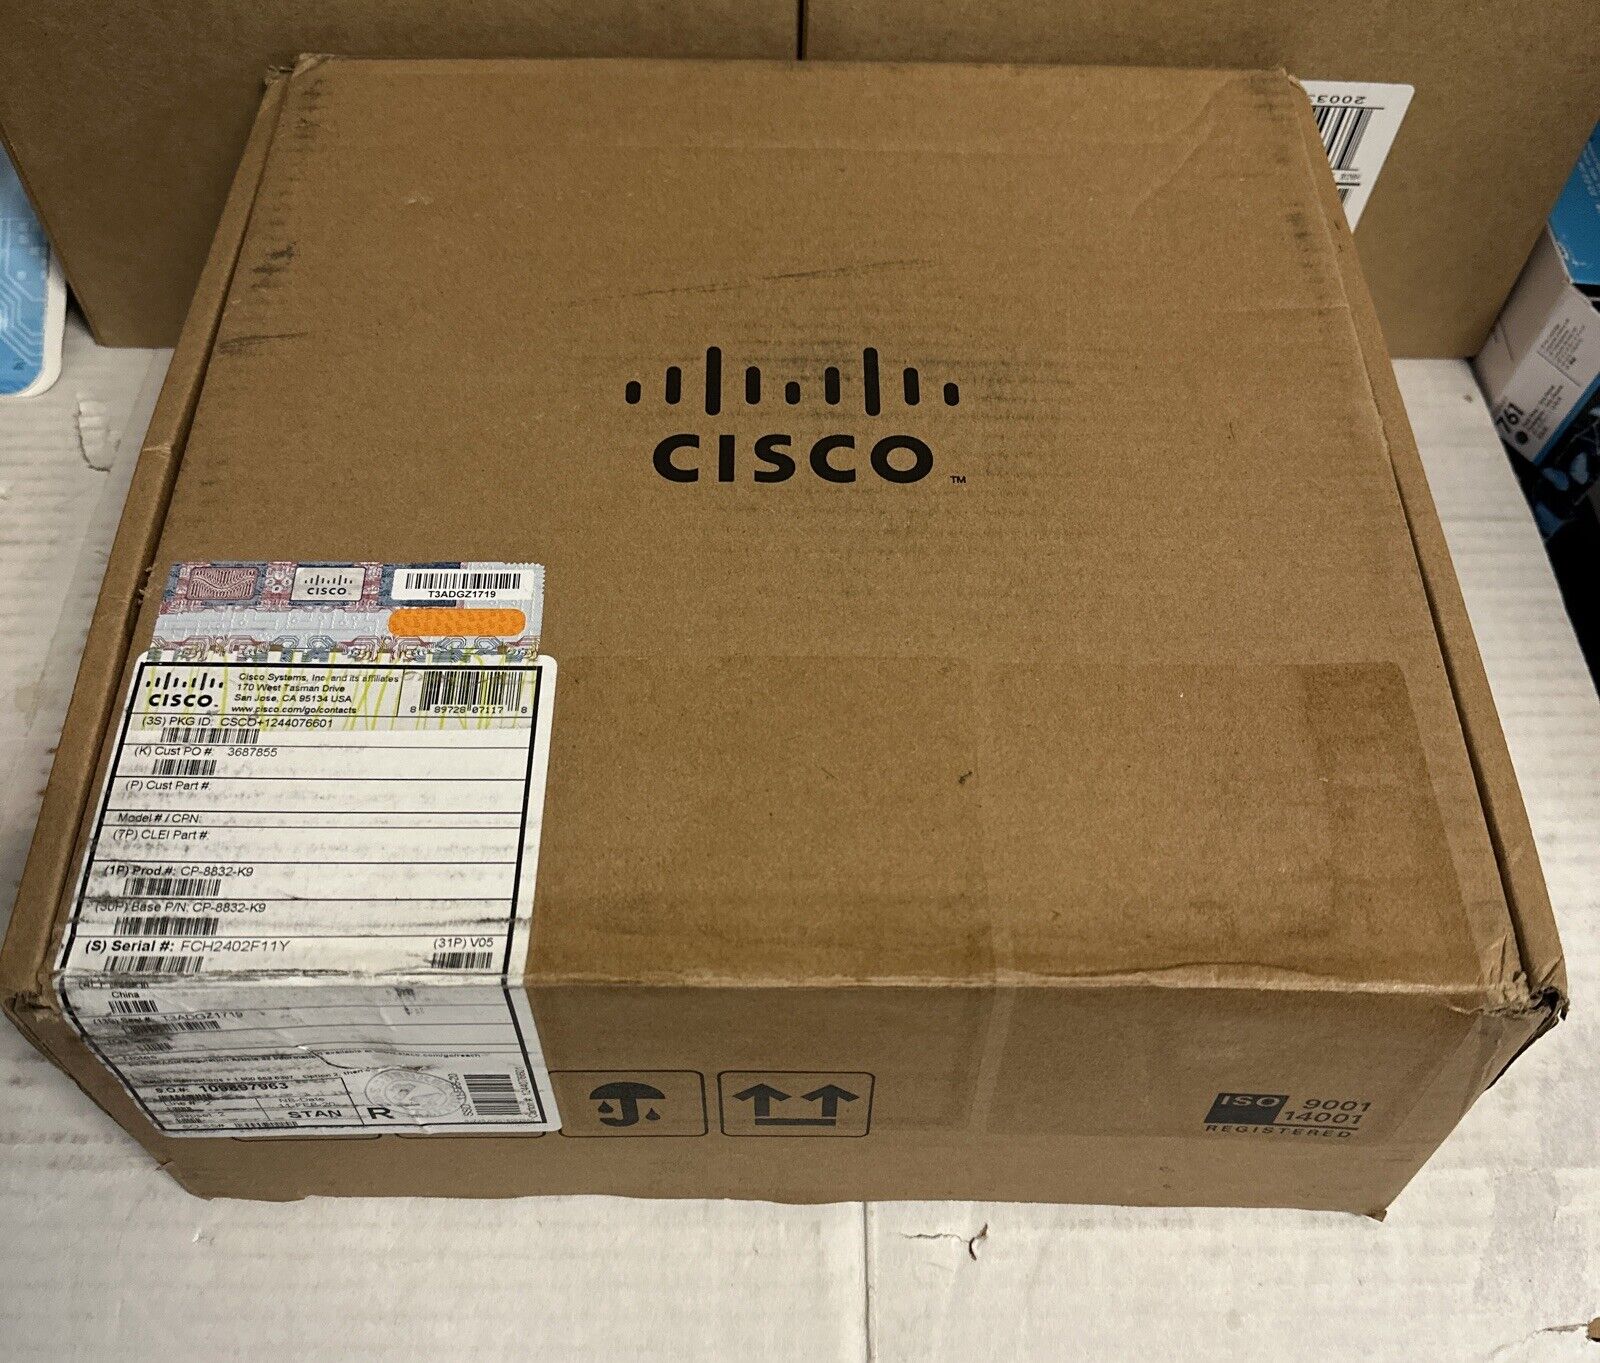 CISCO 8832 IP CONFERENCE PHONE CP-8832  PHOTOS  BRAND NEW 